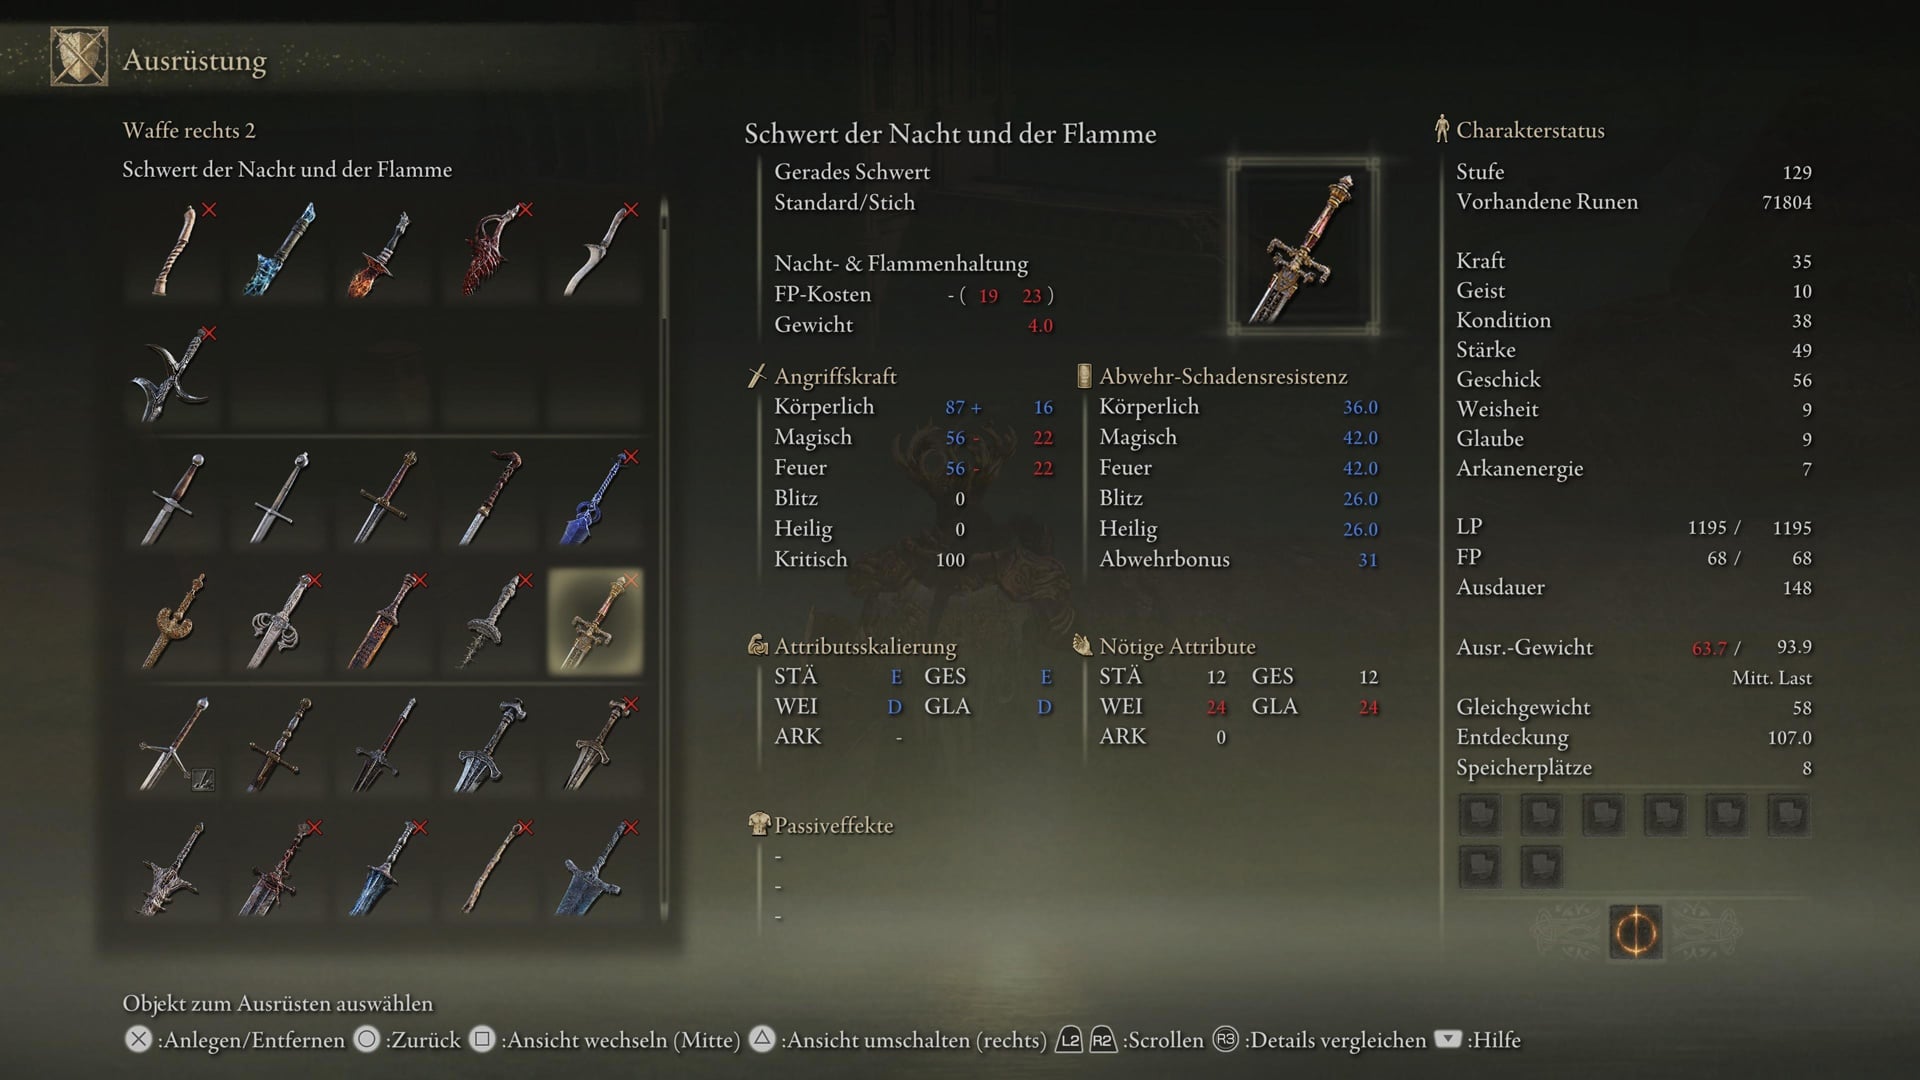 The sword is best suited if you prefer a mage build because of the high attribute requirements.